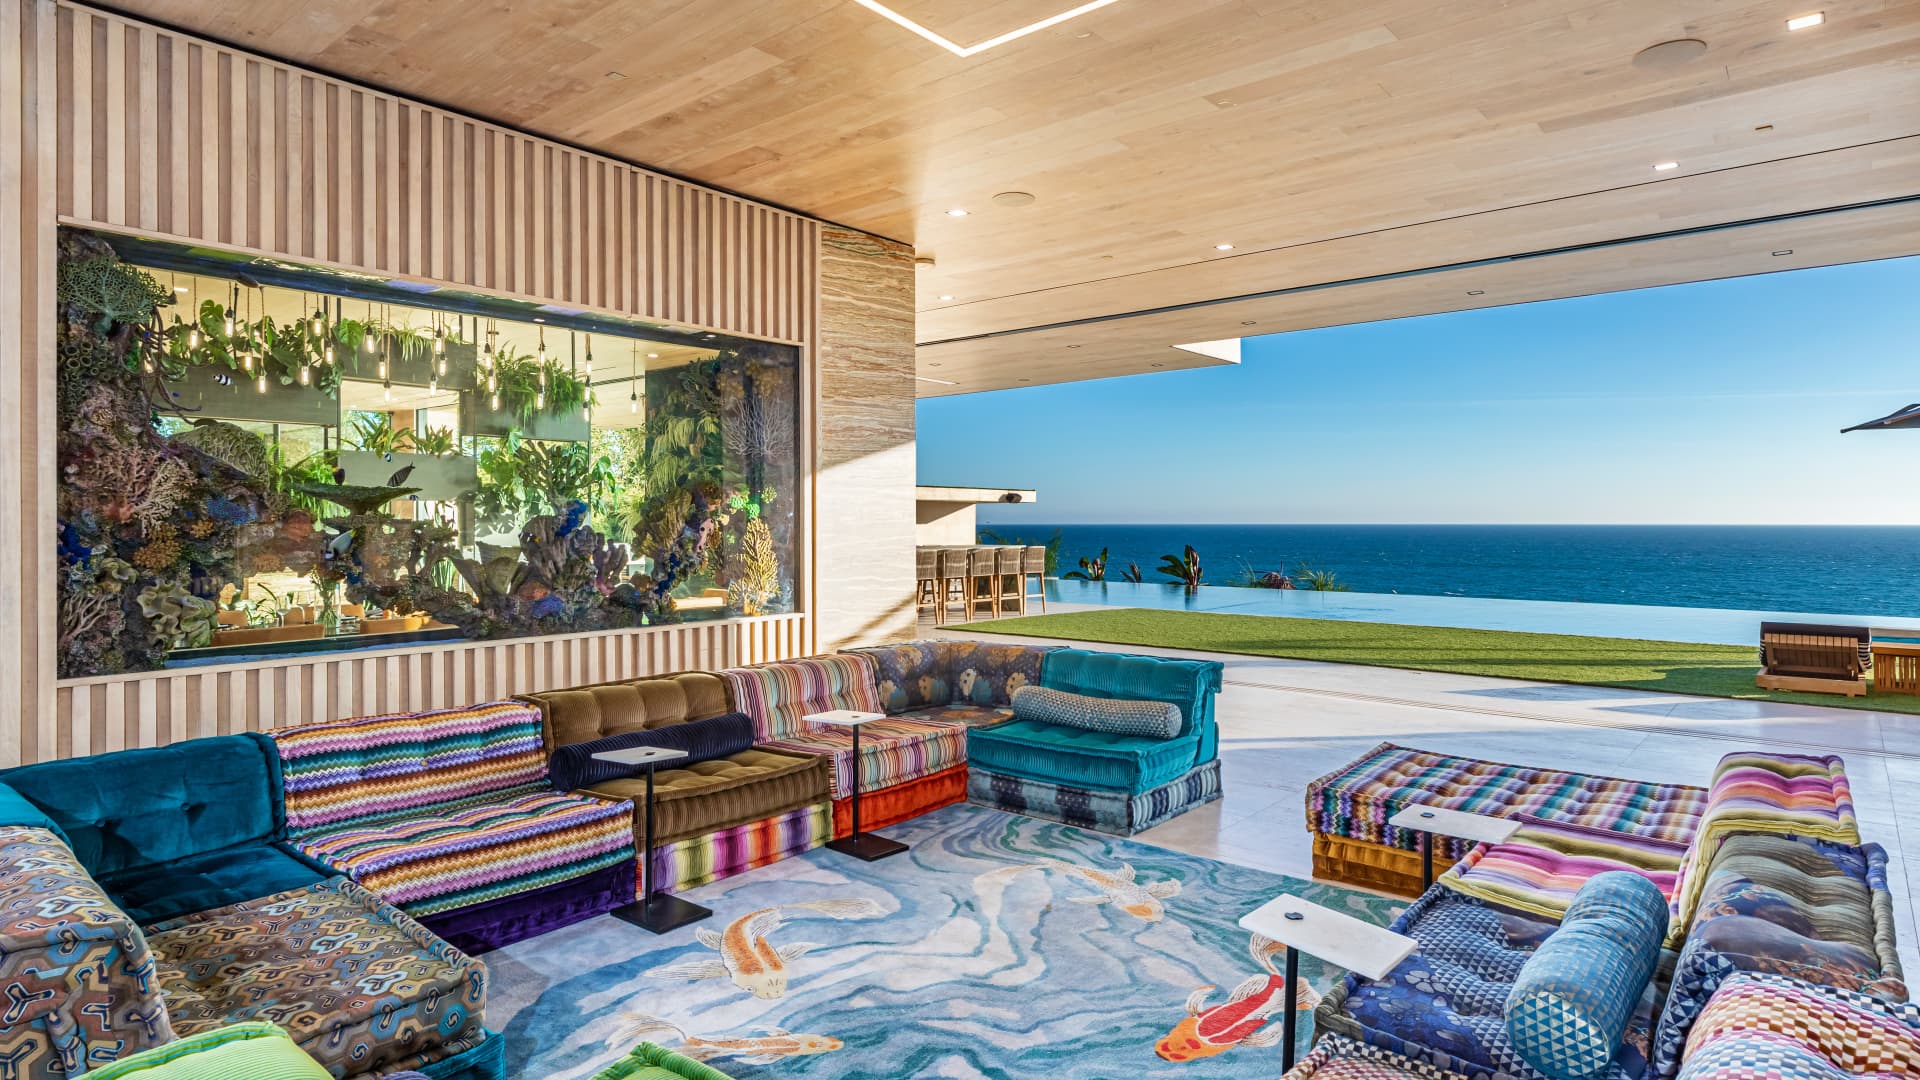 The brightly-colored living area has a trifecta of water views including the 2,000 gallon aquarium, infinity pool and Pacific Ocean.